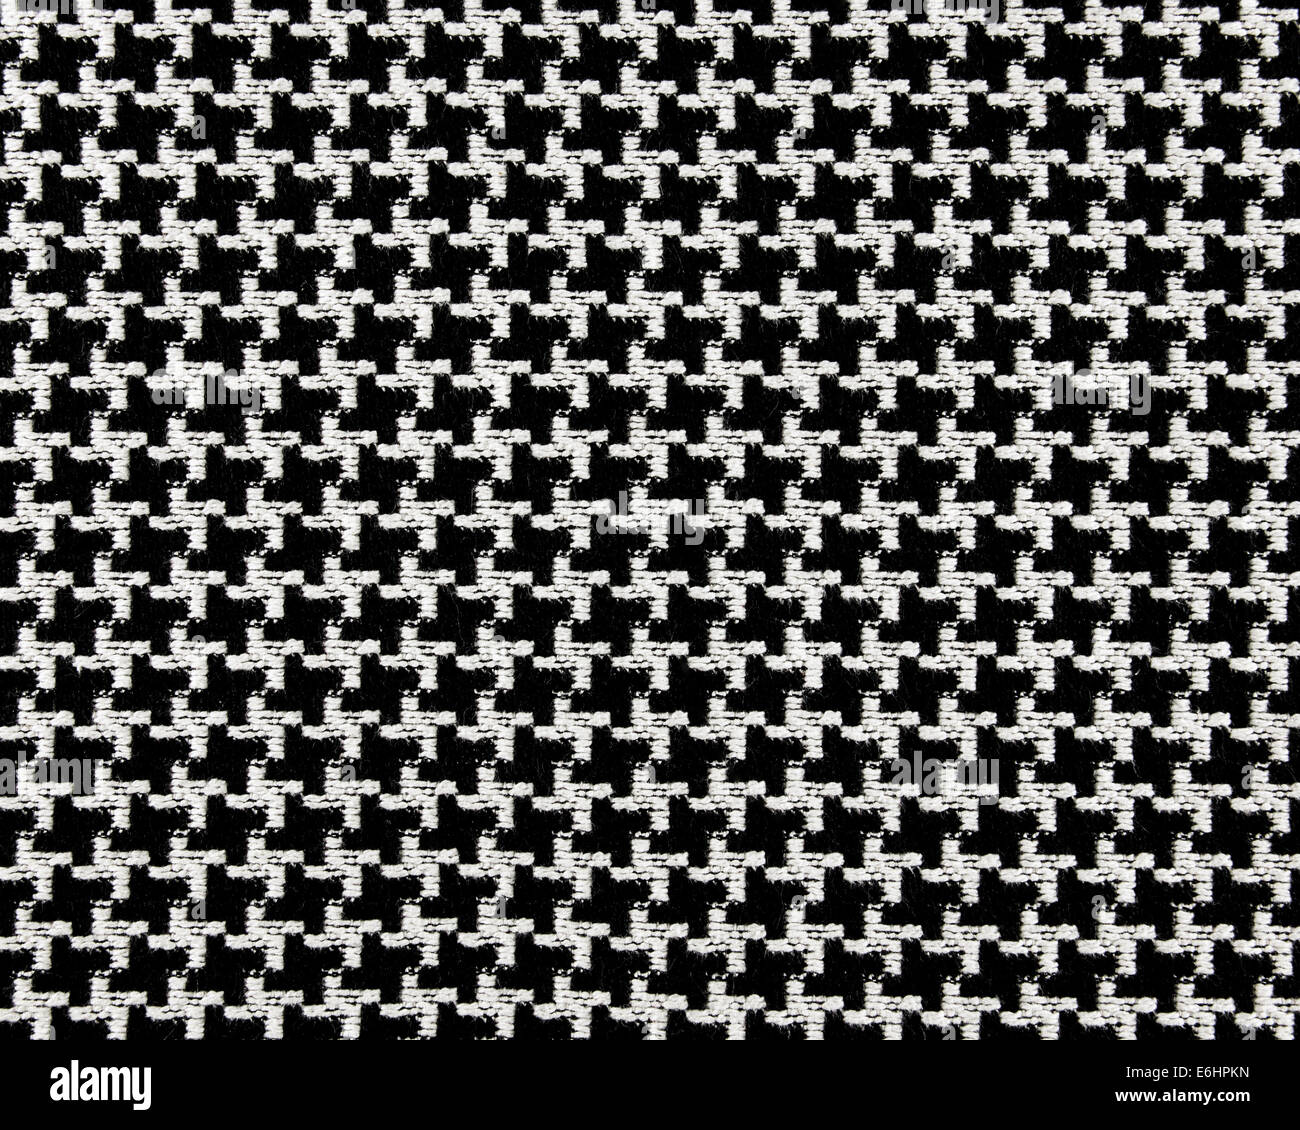 Black and white cotton fabric in abstract pattern for background or texture Stock Photo